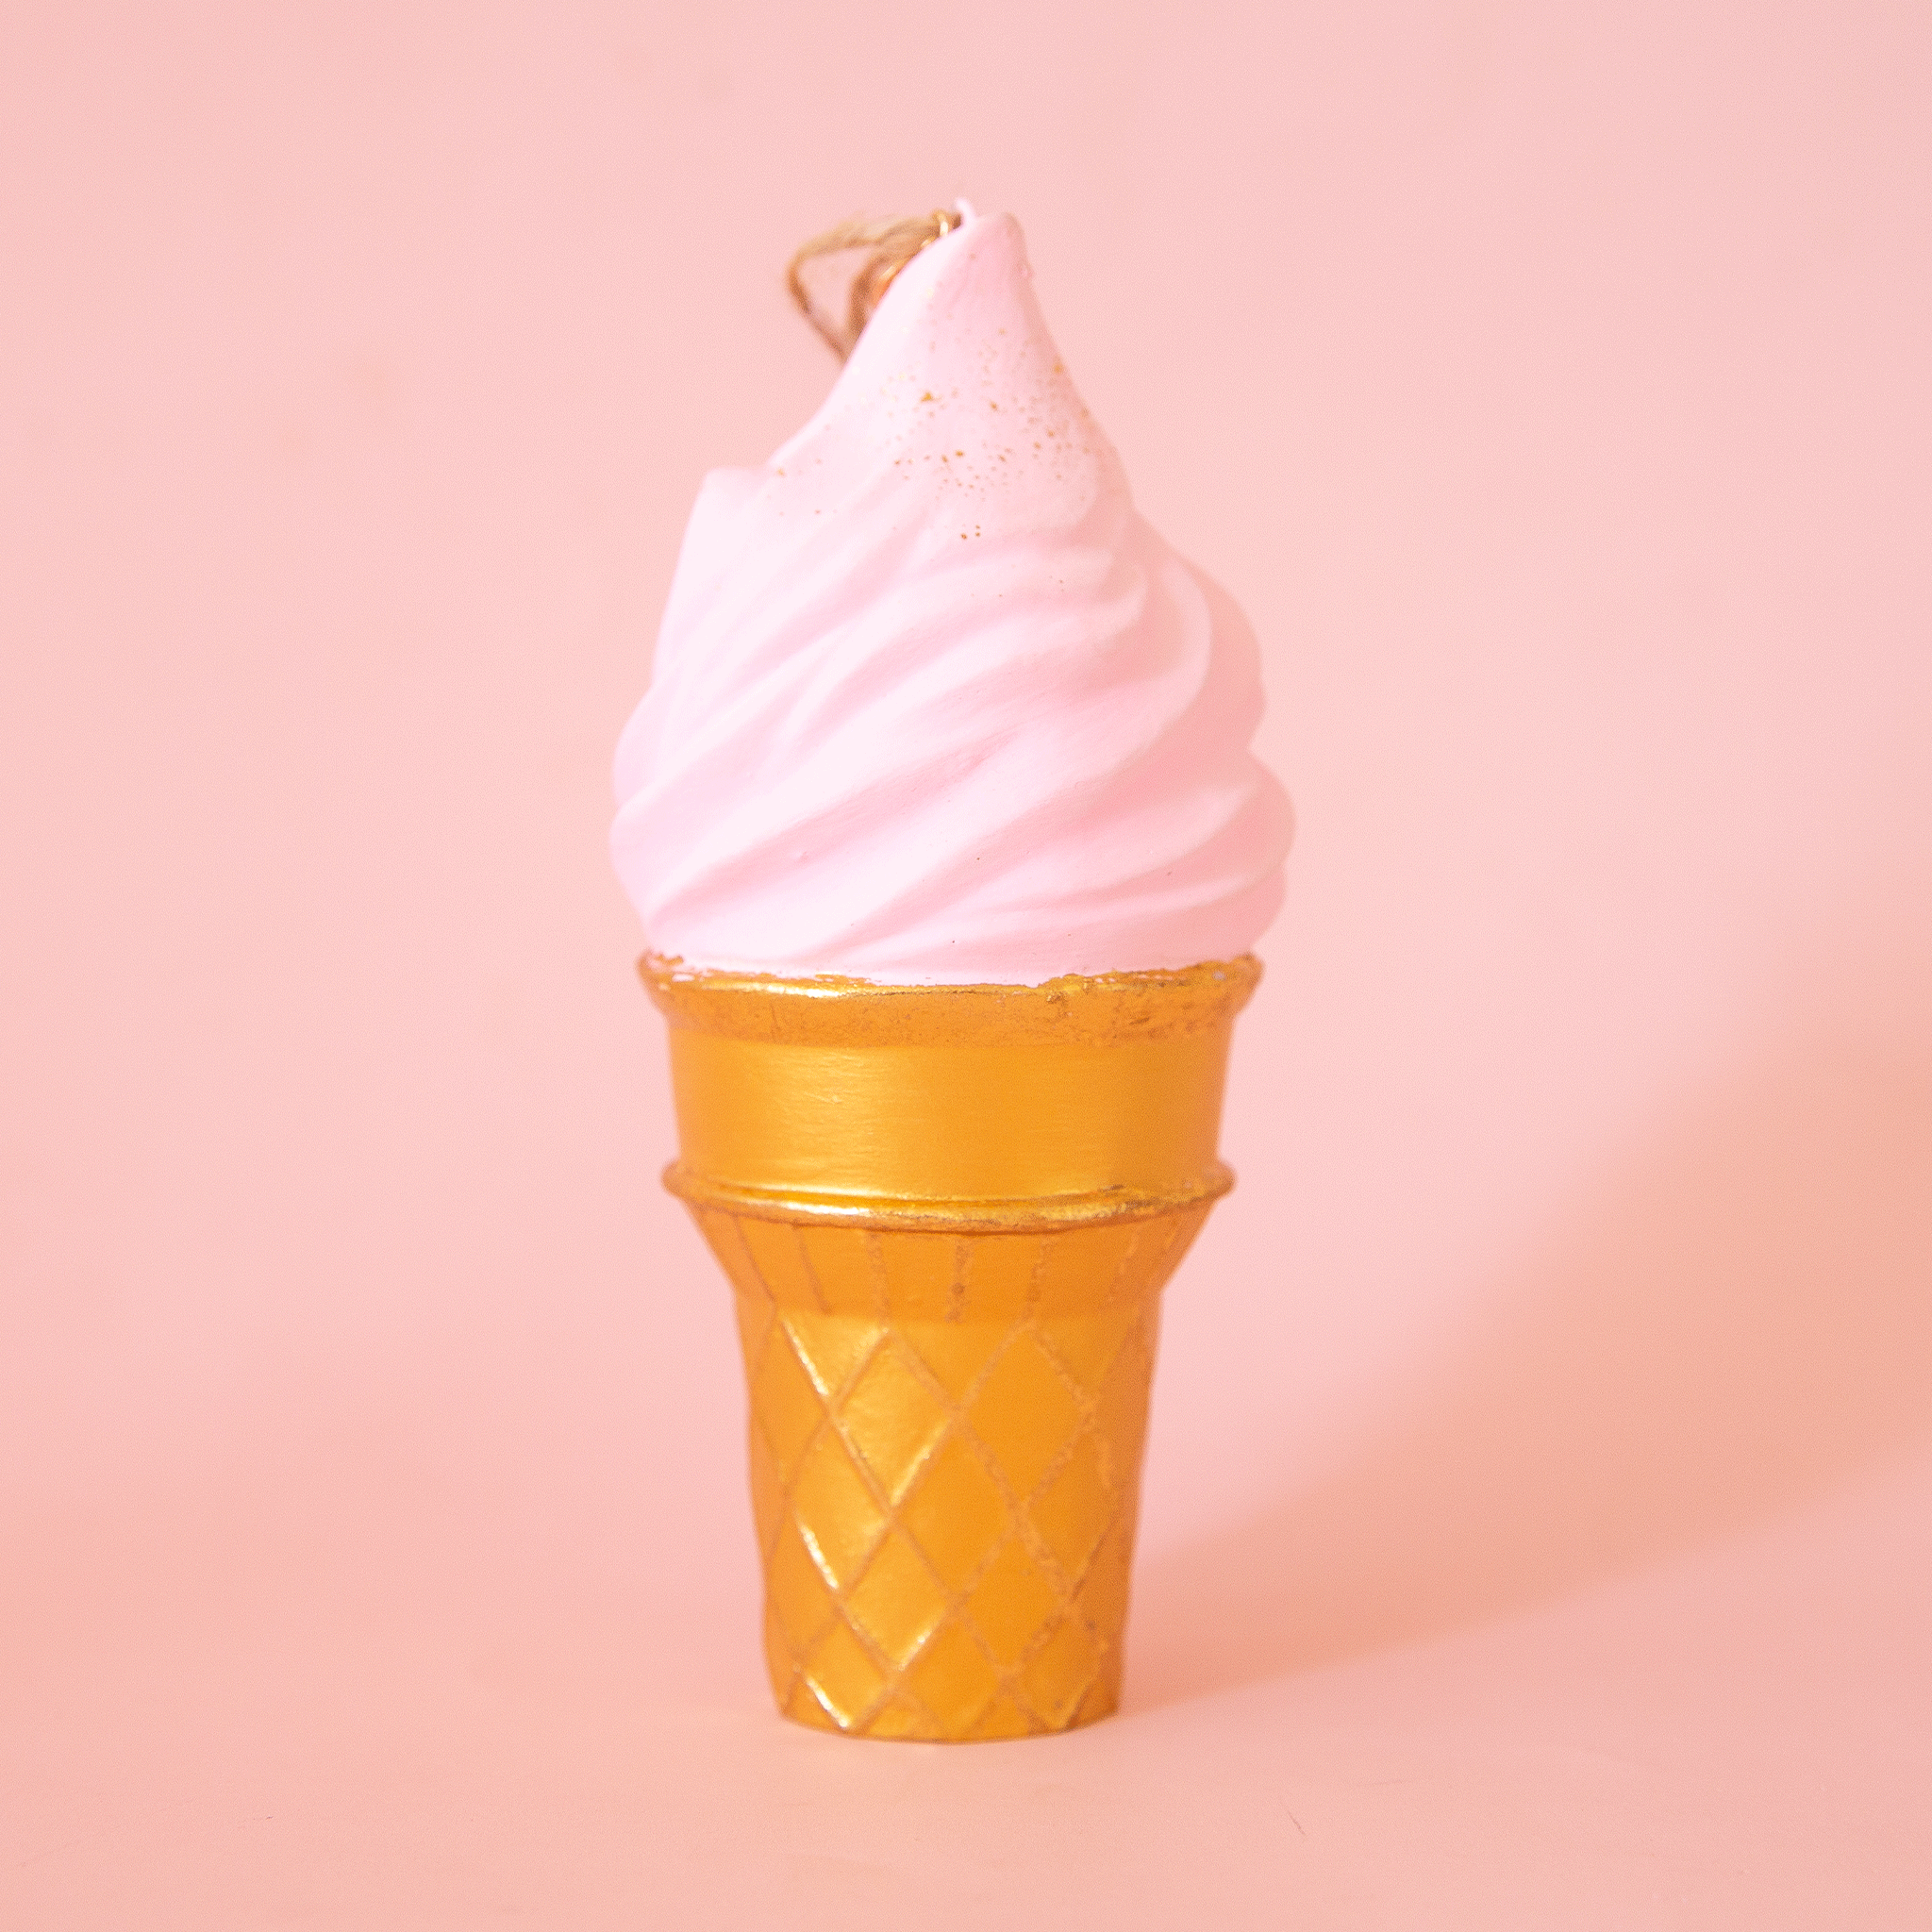 On a pink background is a light pink ice cream cone shaped ornament. 